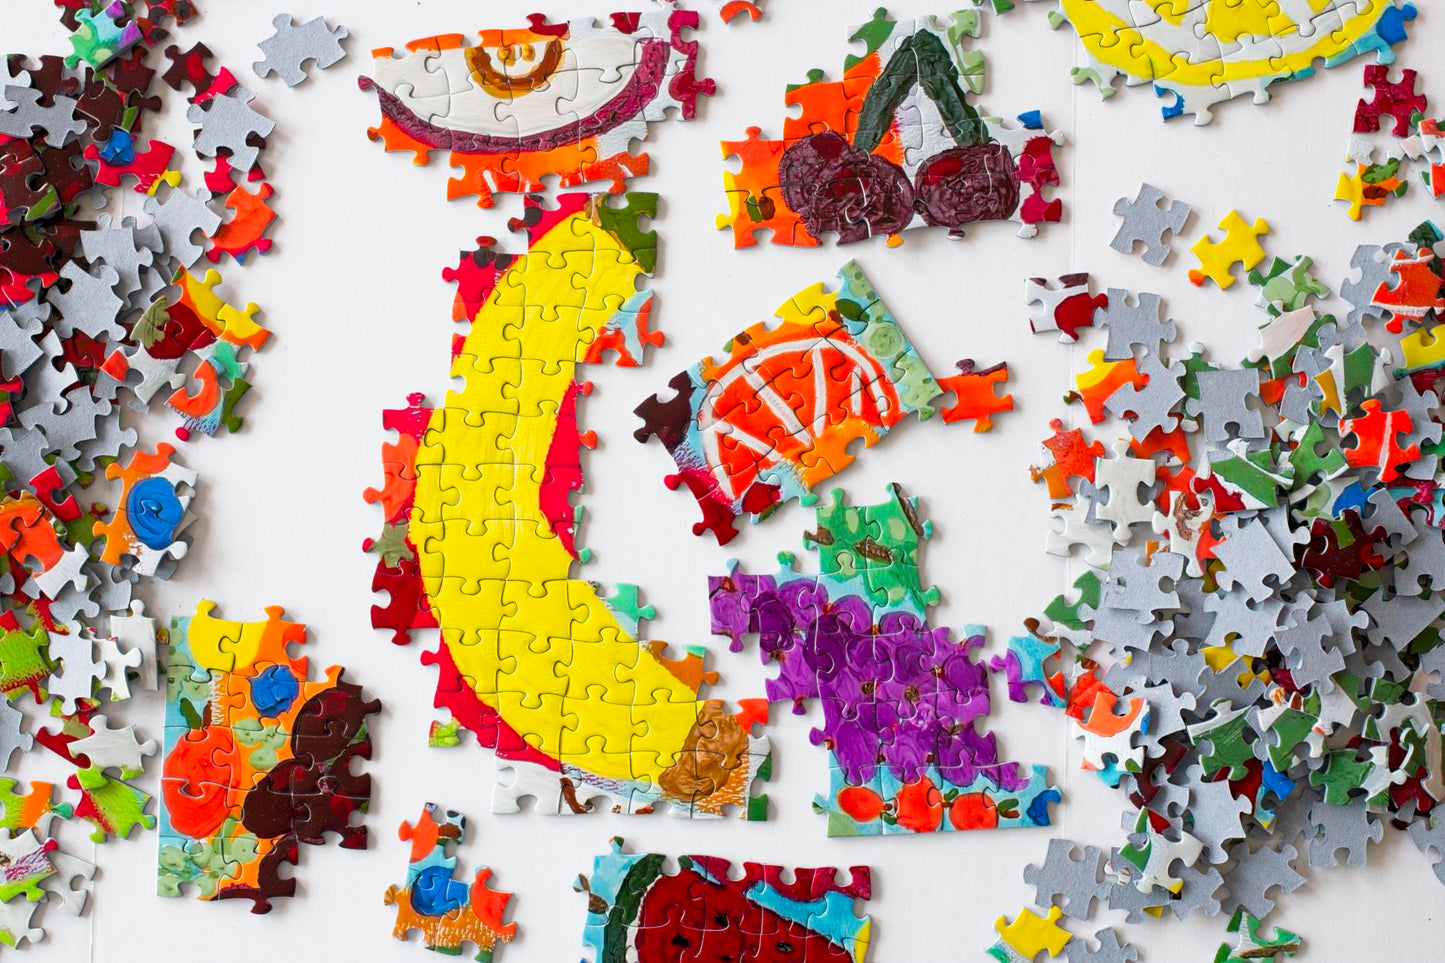 A partially assembled colorful jigsaw puzzle with a variety of fruit artistically rendered